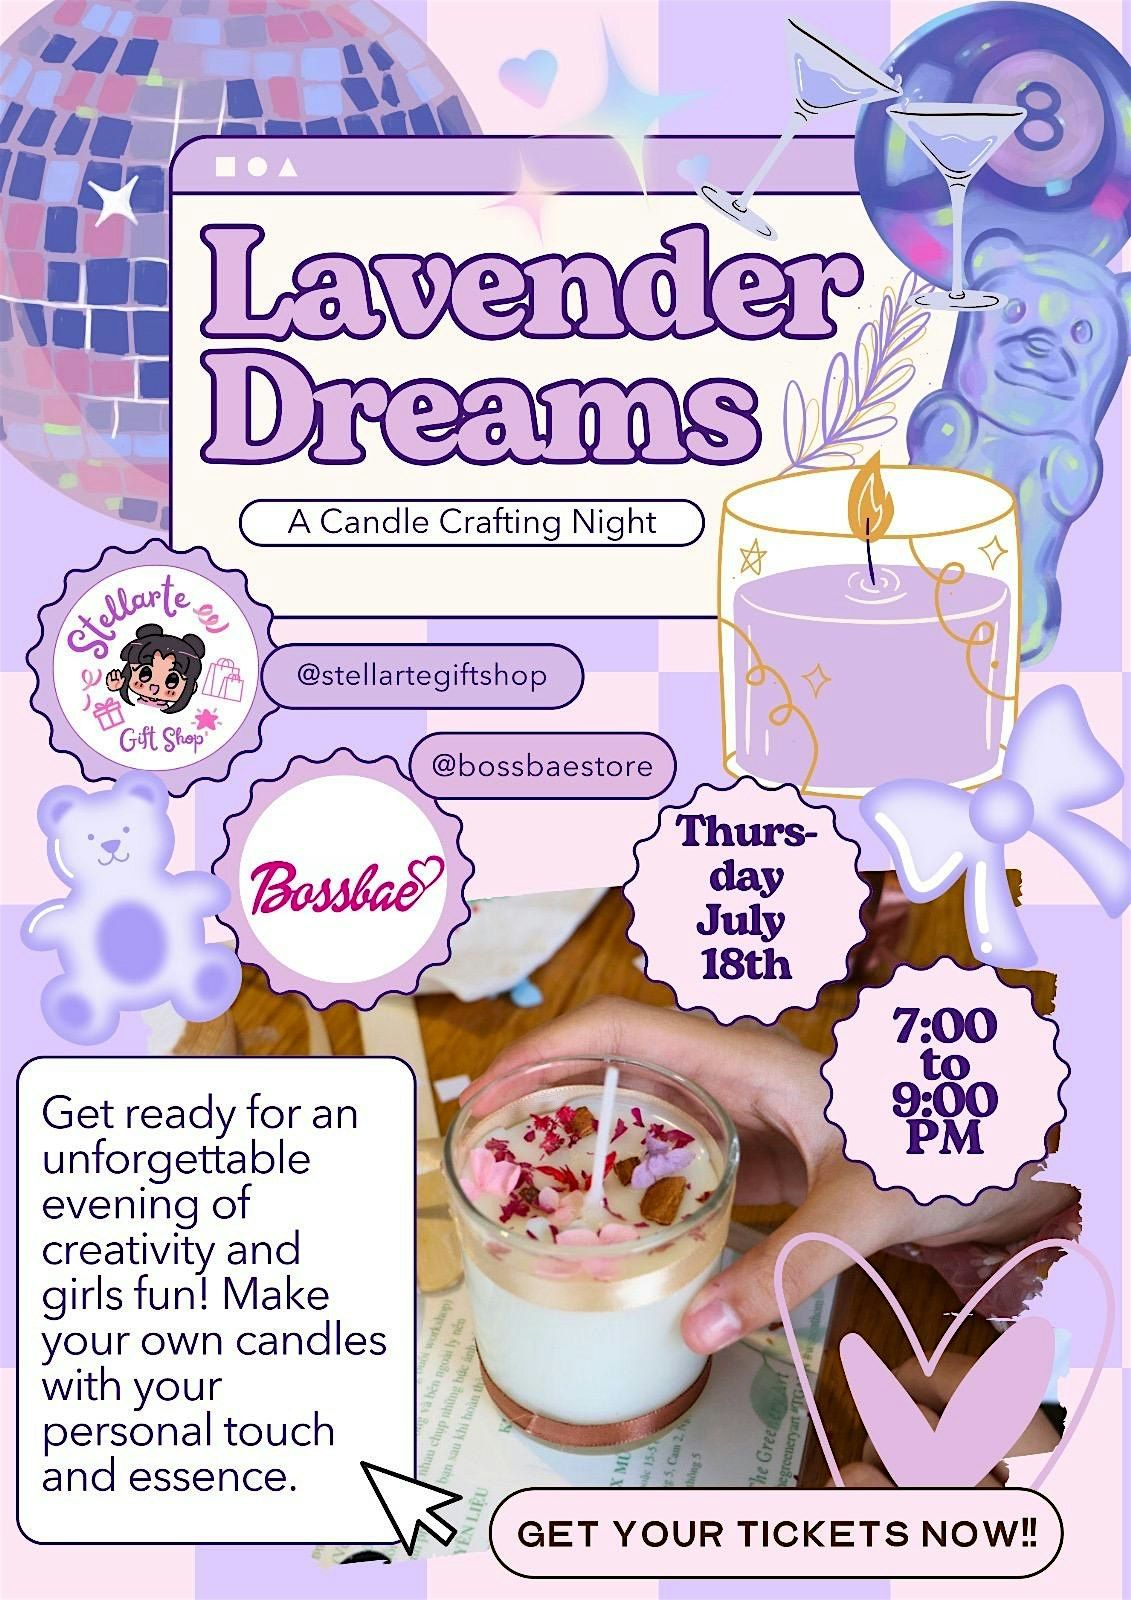 Lavender Dreams - A Candle Crafting Night